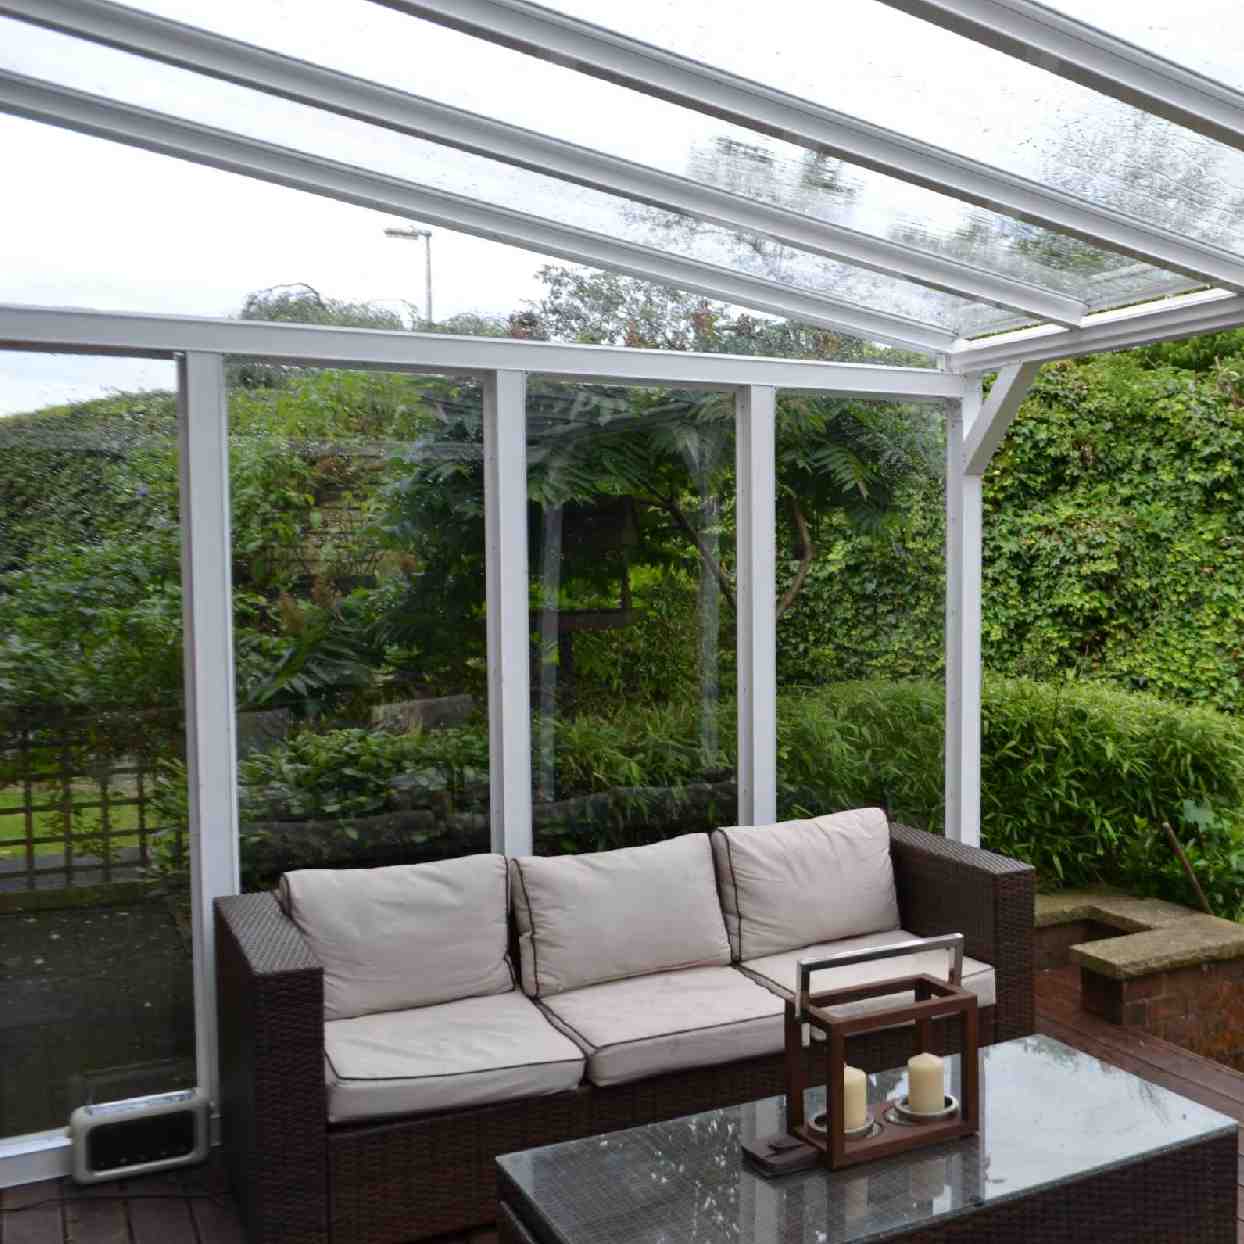 Buy Omega Verandah White with 16mm Polycarbonate Glazing - 7.4m (W) x 2.0m (P), (4) Supporting Posts online today